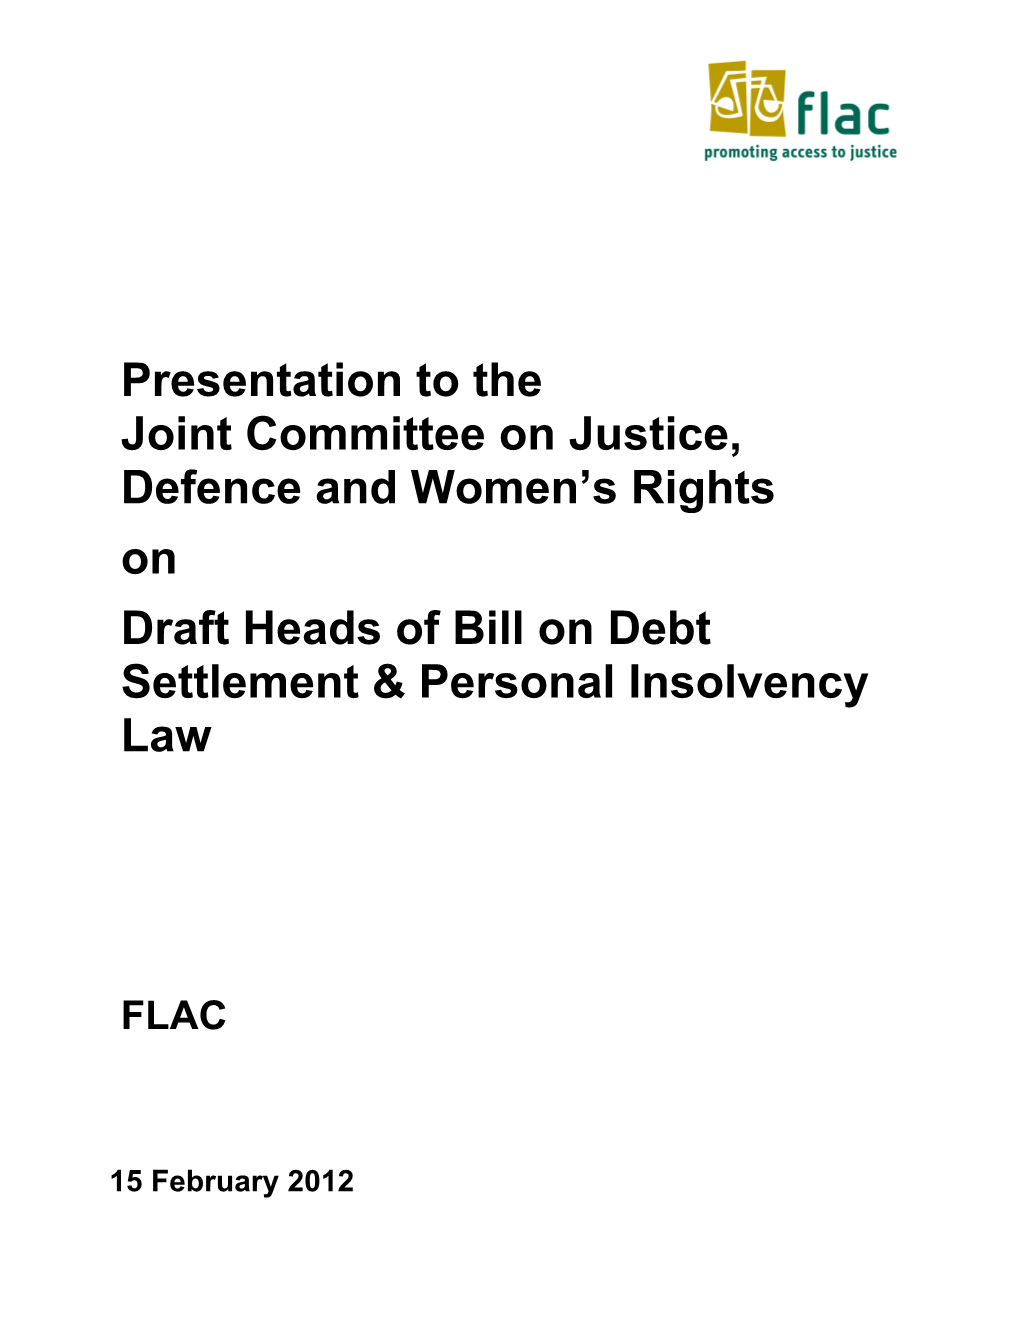 Draft Heads of Bill on Debt Settlement & Personal Insolvency Law